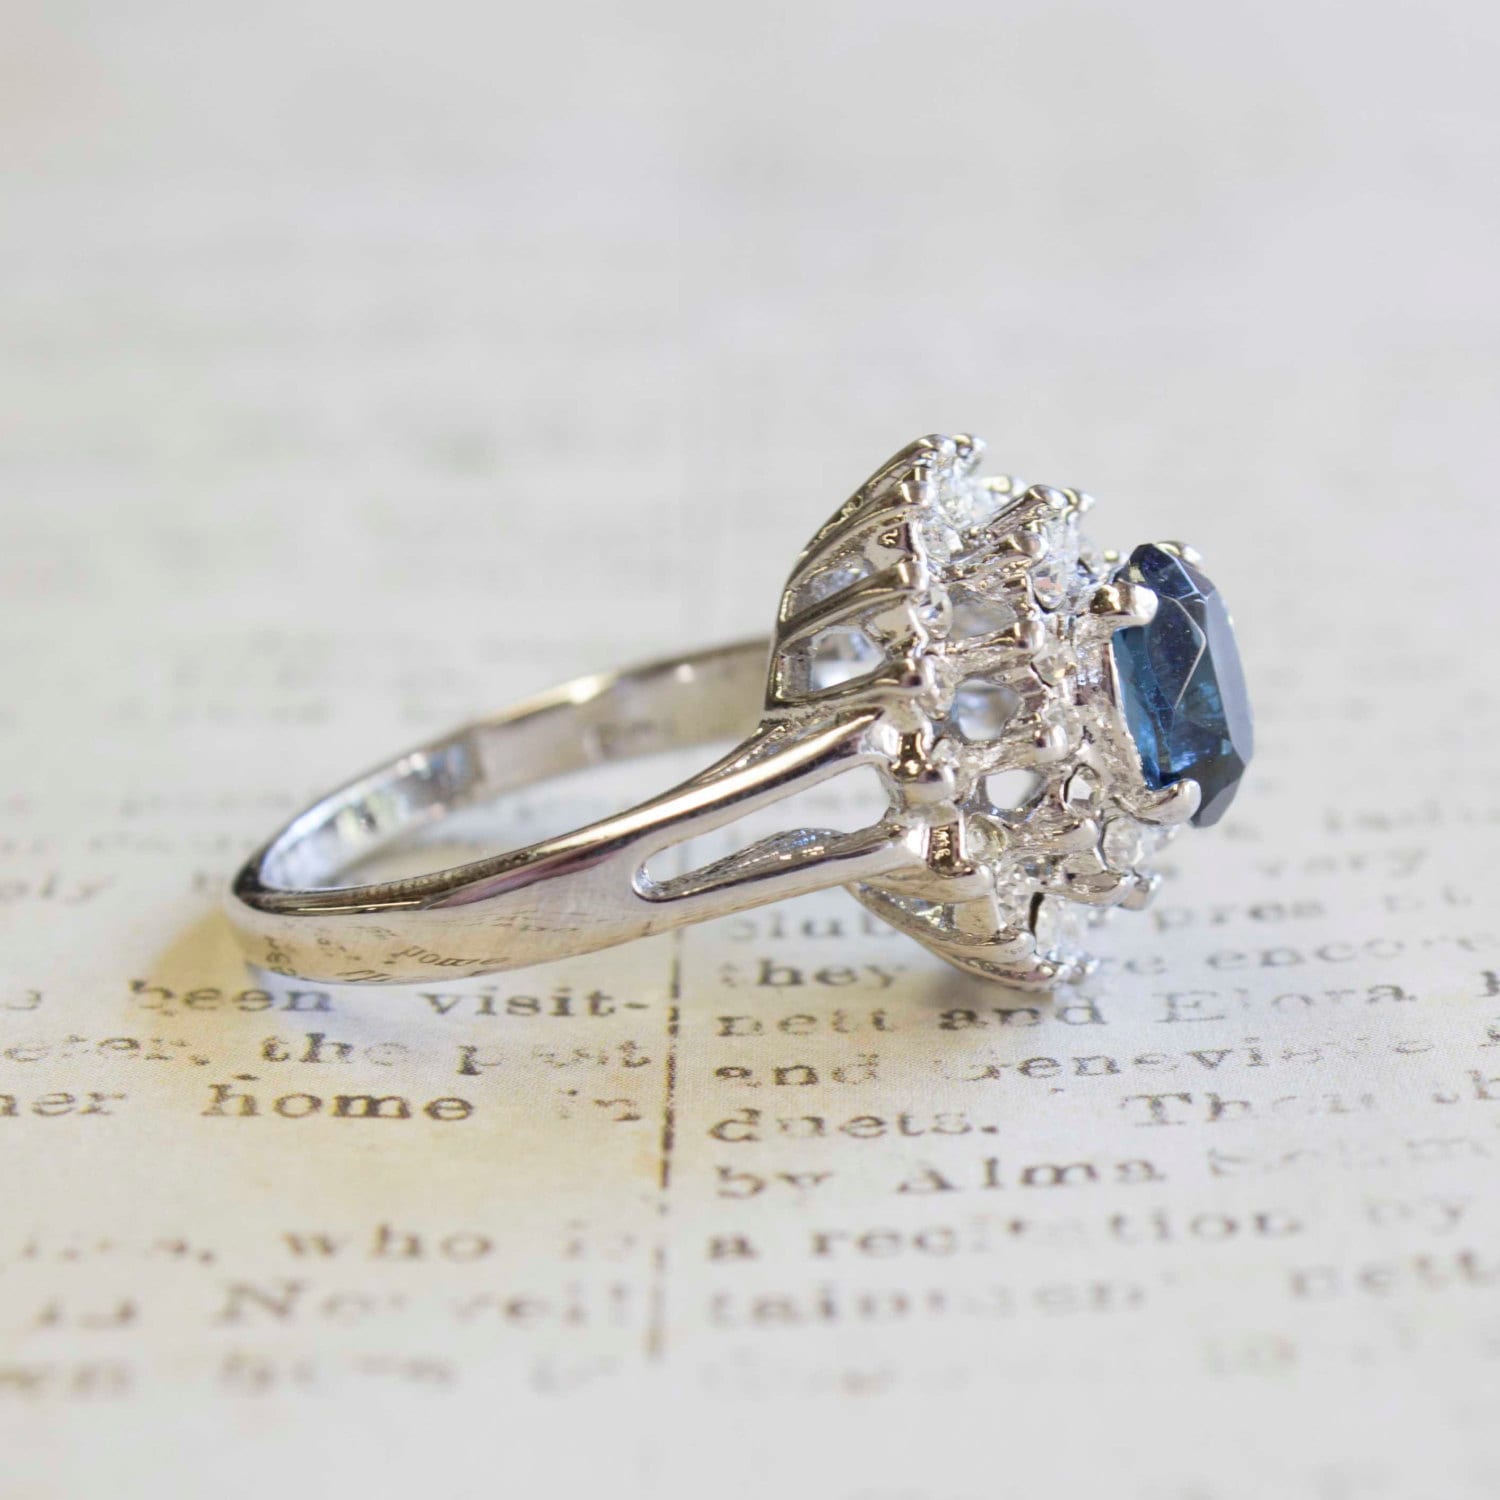 Vintage Ring 1970s Sapphire and Clear Swarovski Crystals 18k and White Gold Silver Ring #R1352 - Limited Stock - Never Worn